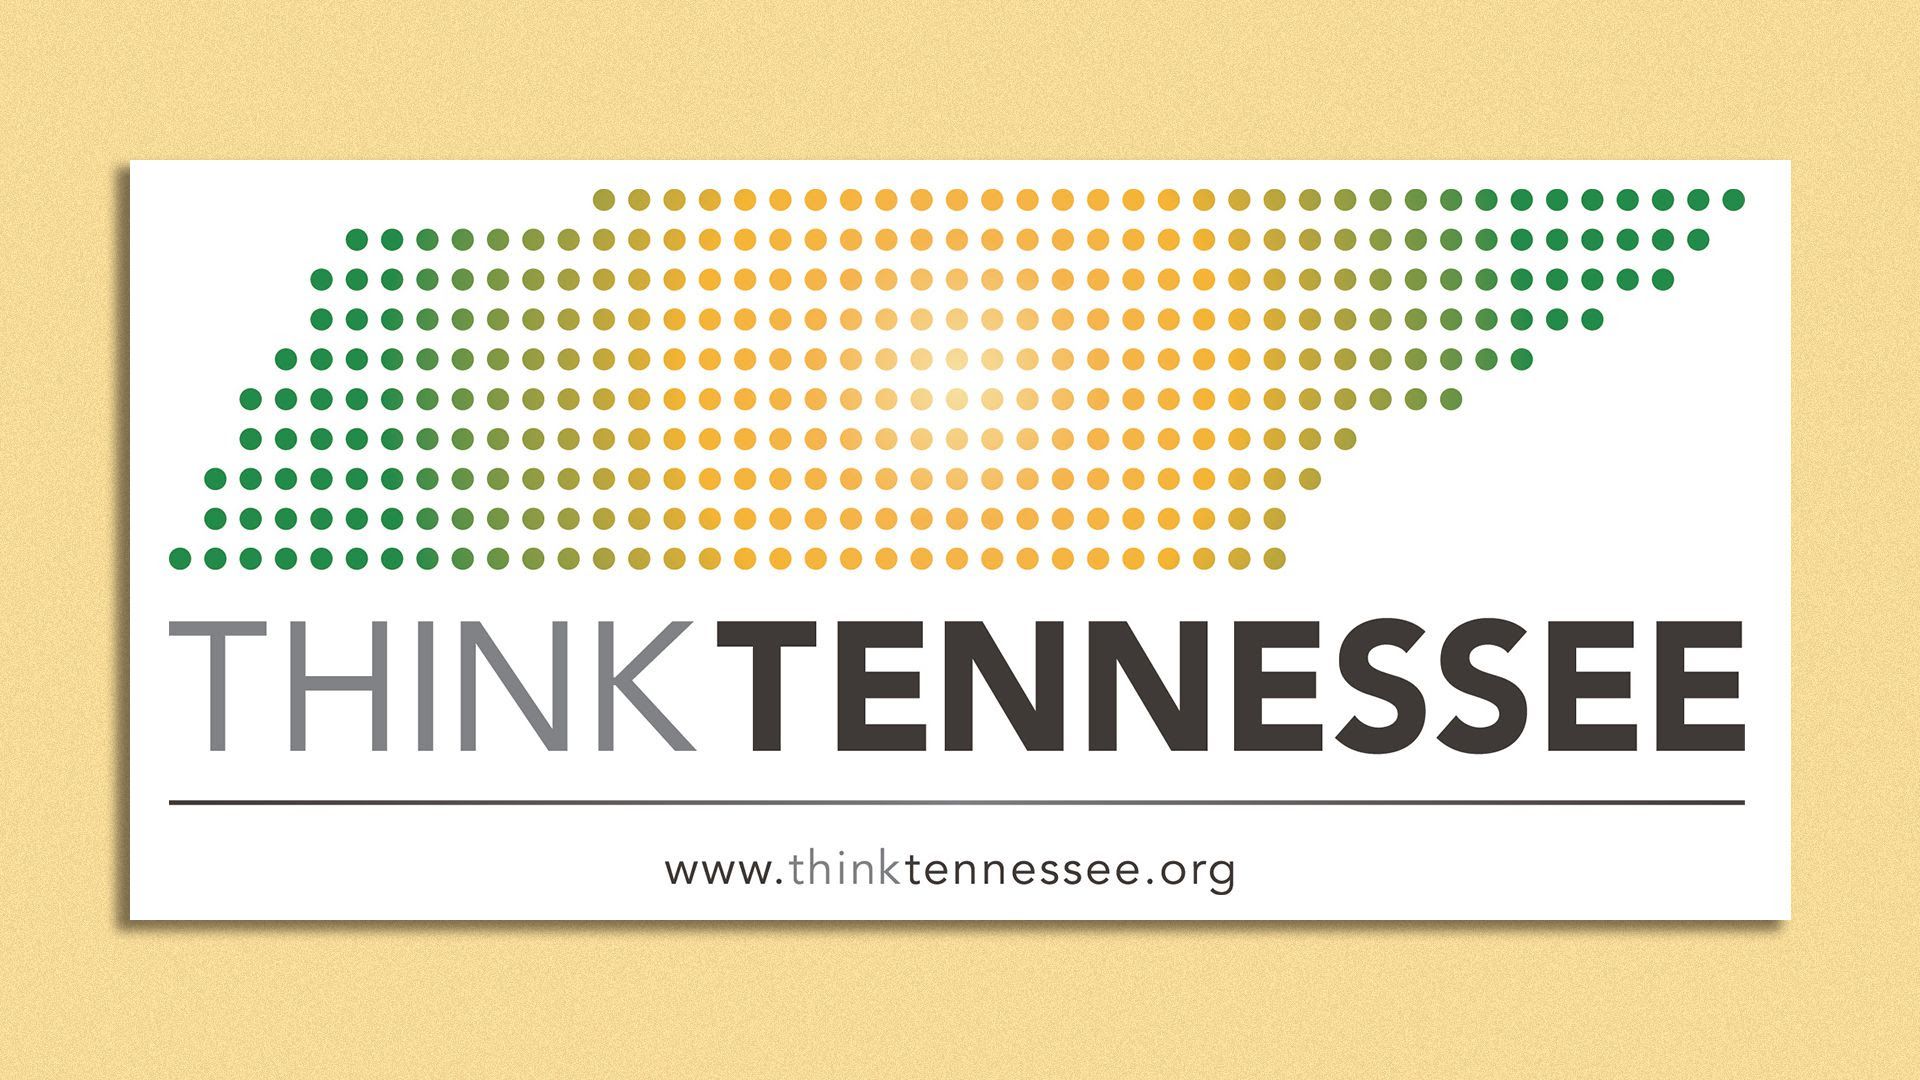 The Think Tennessee logo over a yellow background.